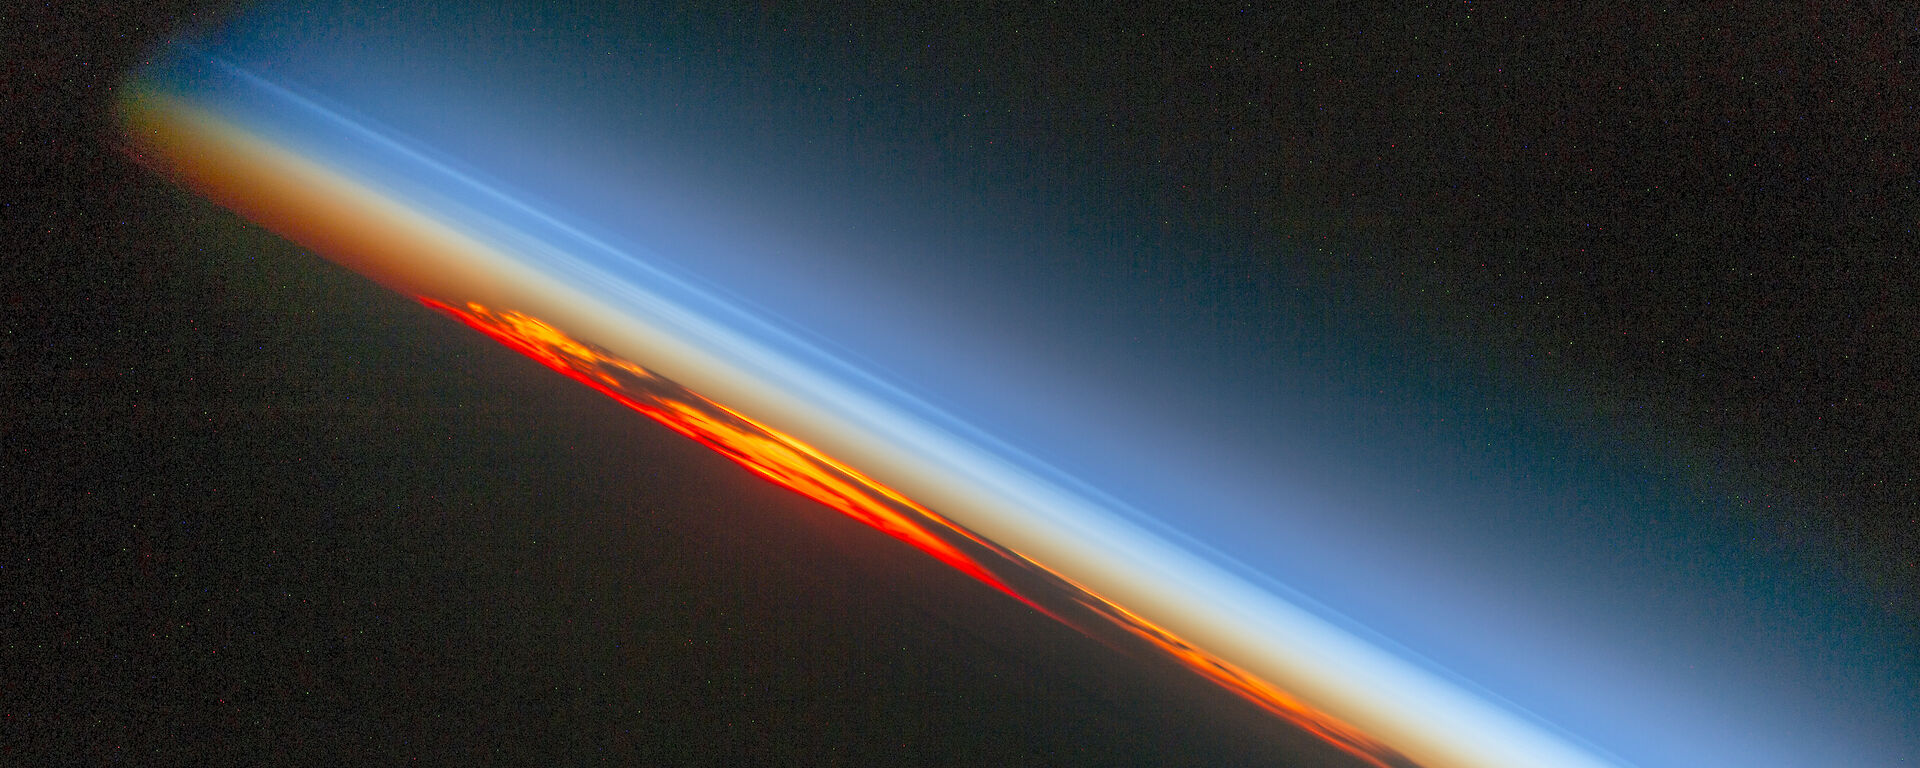 The earth's atmosphere viewed from space.